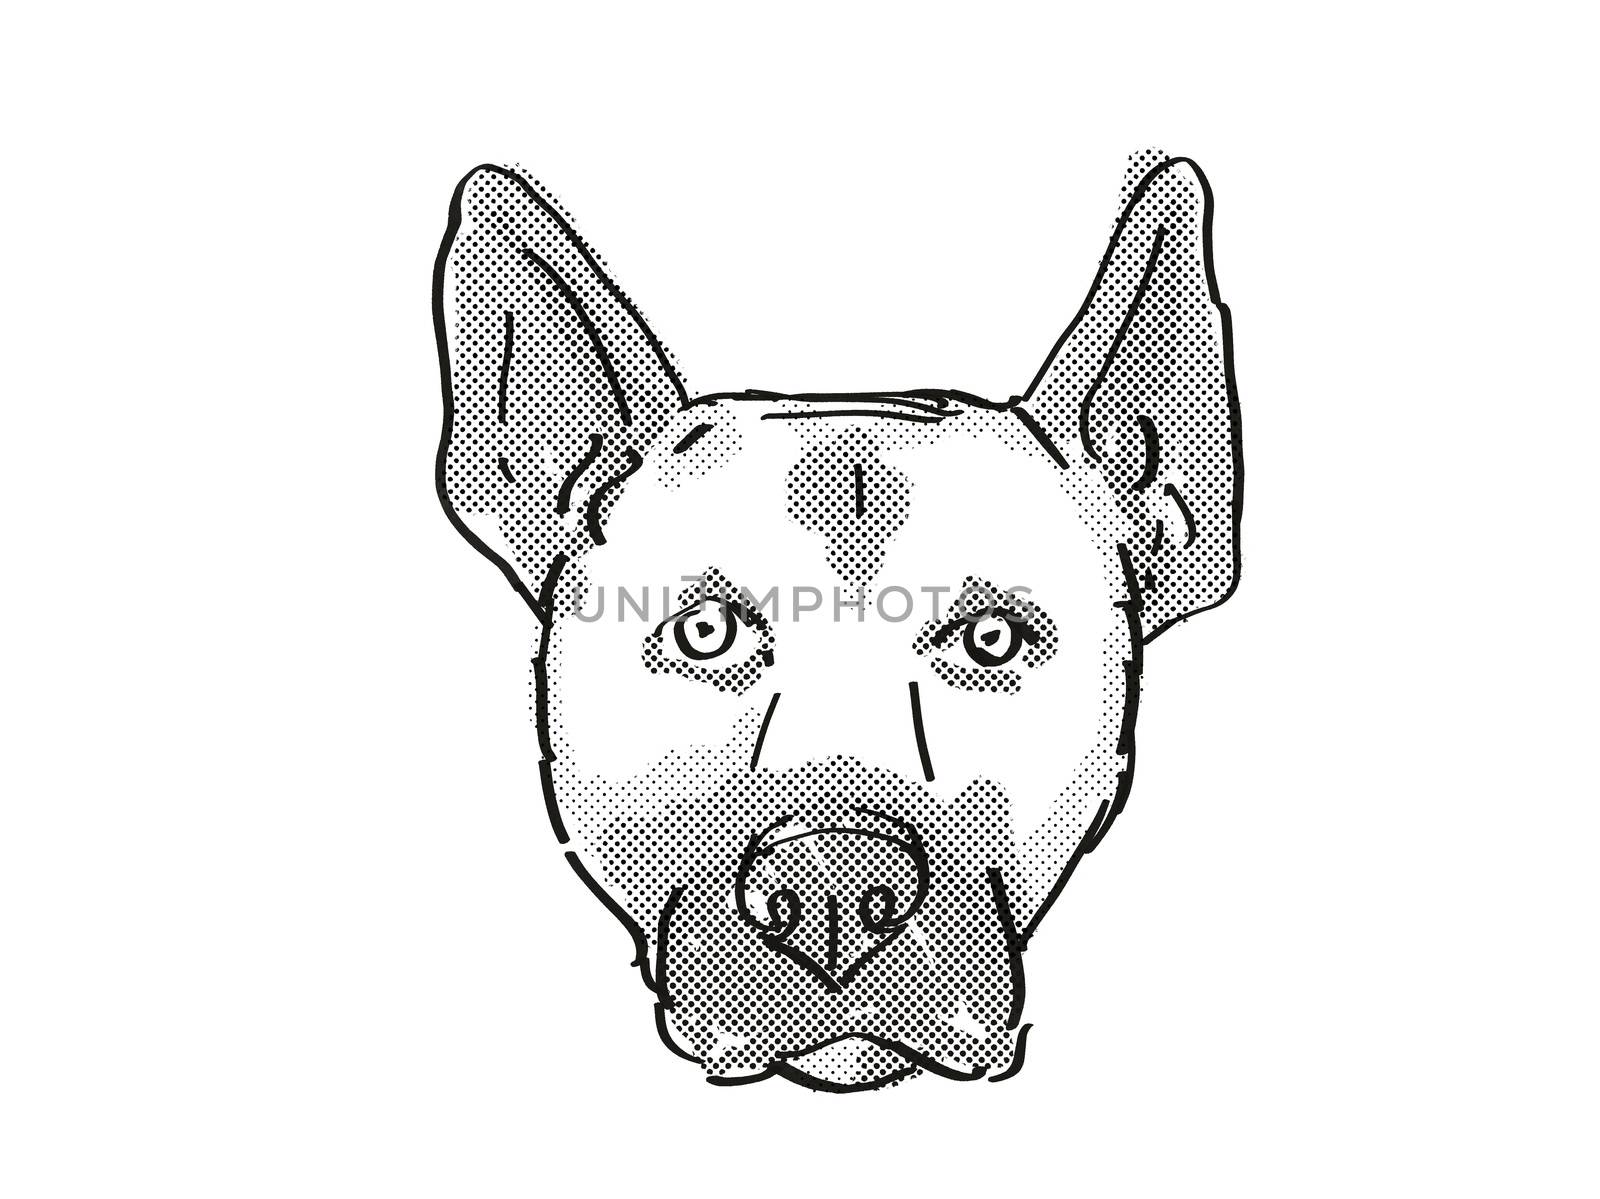 Retro cartoon style drawing of head of a Belgian Malinois , a domestic dog or canine breed on isolated white background done in black and white.